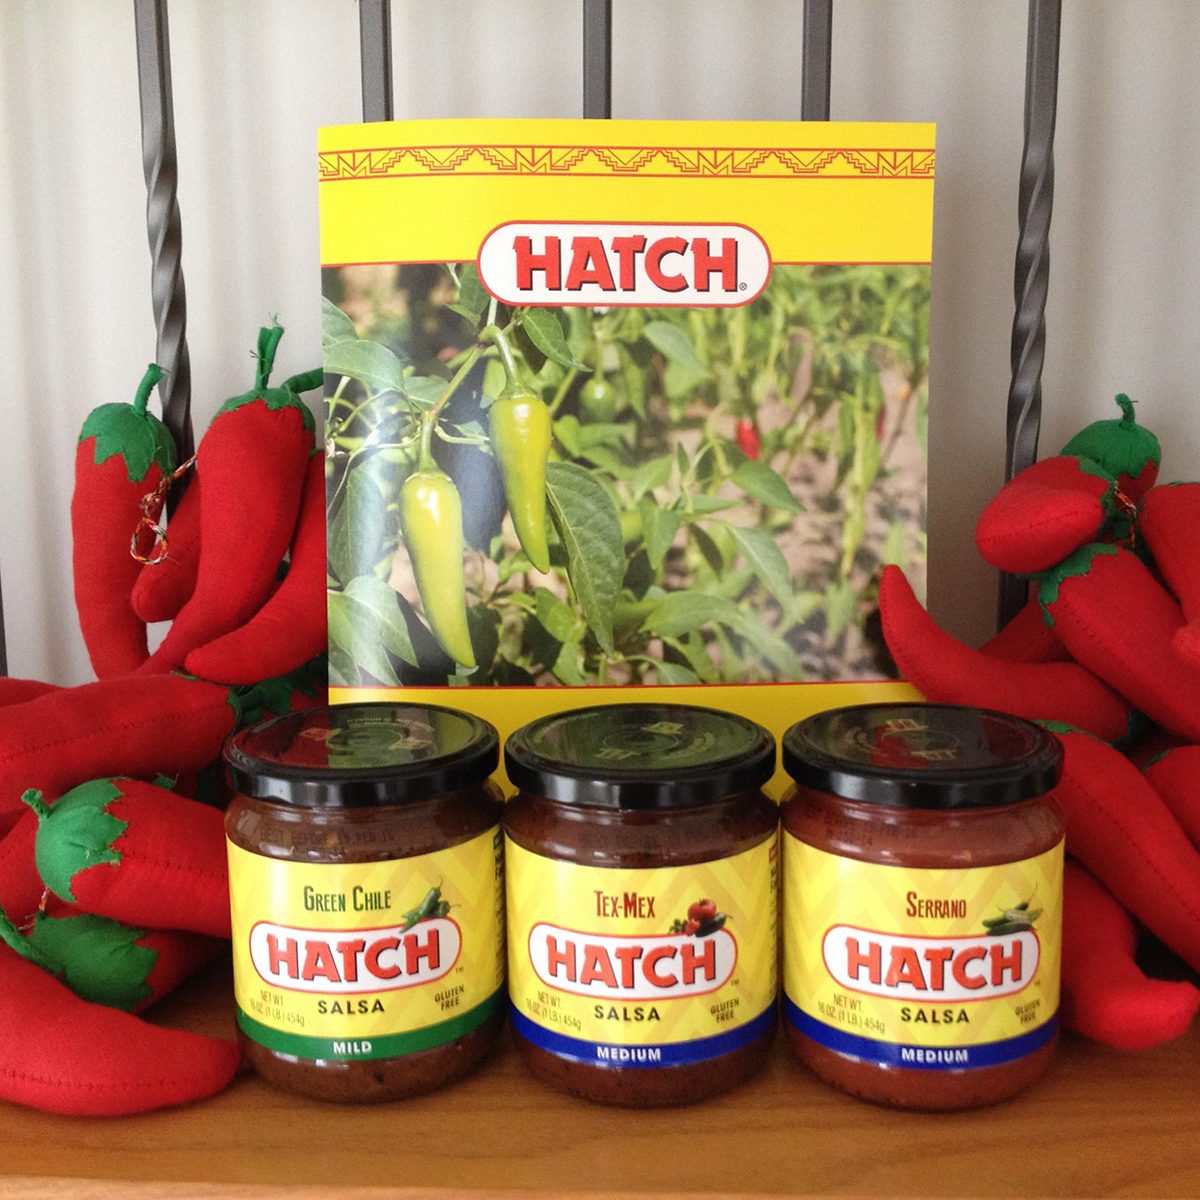 <p><strong><a class="SWhtmlLink" href="https://www.hatchchileco.com" rel="noopener">Hatch Chile Company</a>, Albuquerque</strong></p> <p>New Mexico is famous for their chiles, but no chile is more iconic than the Hatch green chiles. If you've ever needed a <a class="SWhtmlLink" href="https://www.tasteofhome.com/recipes/chilies-rellenos/" rel="noopener">can of green chiles for chiles rellenos</a>, you've probably grabbed one of their cans.</p>